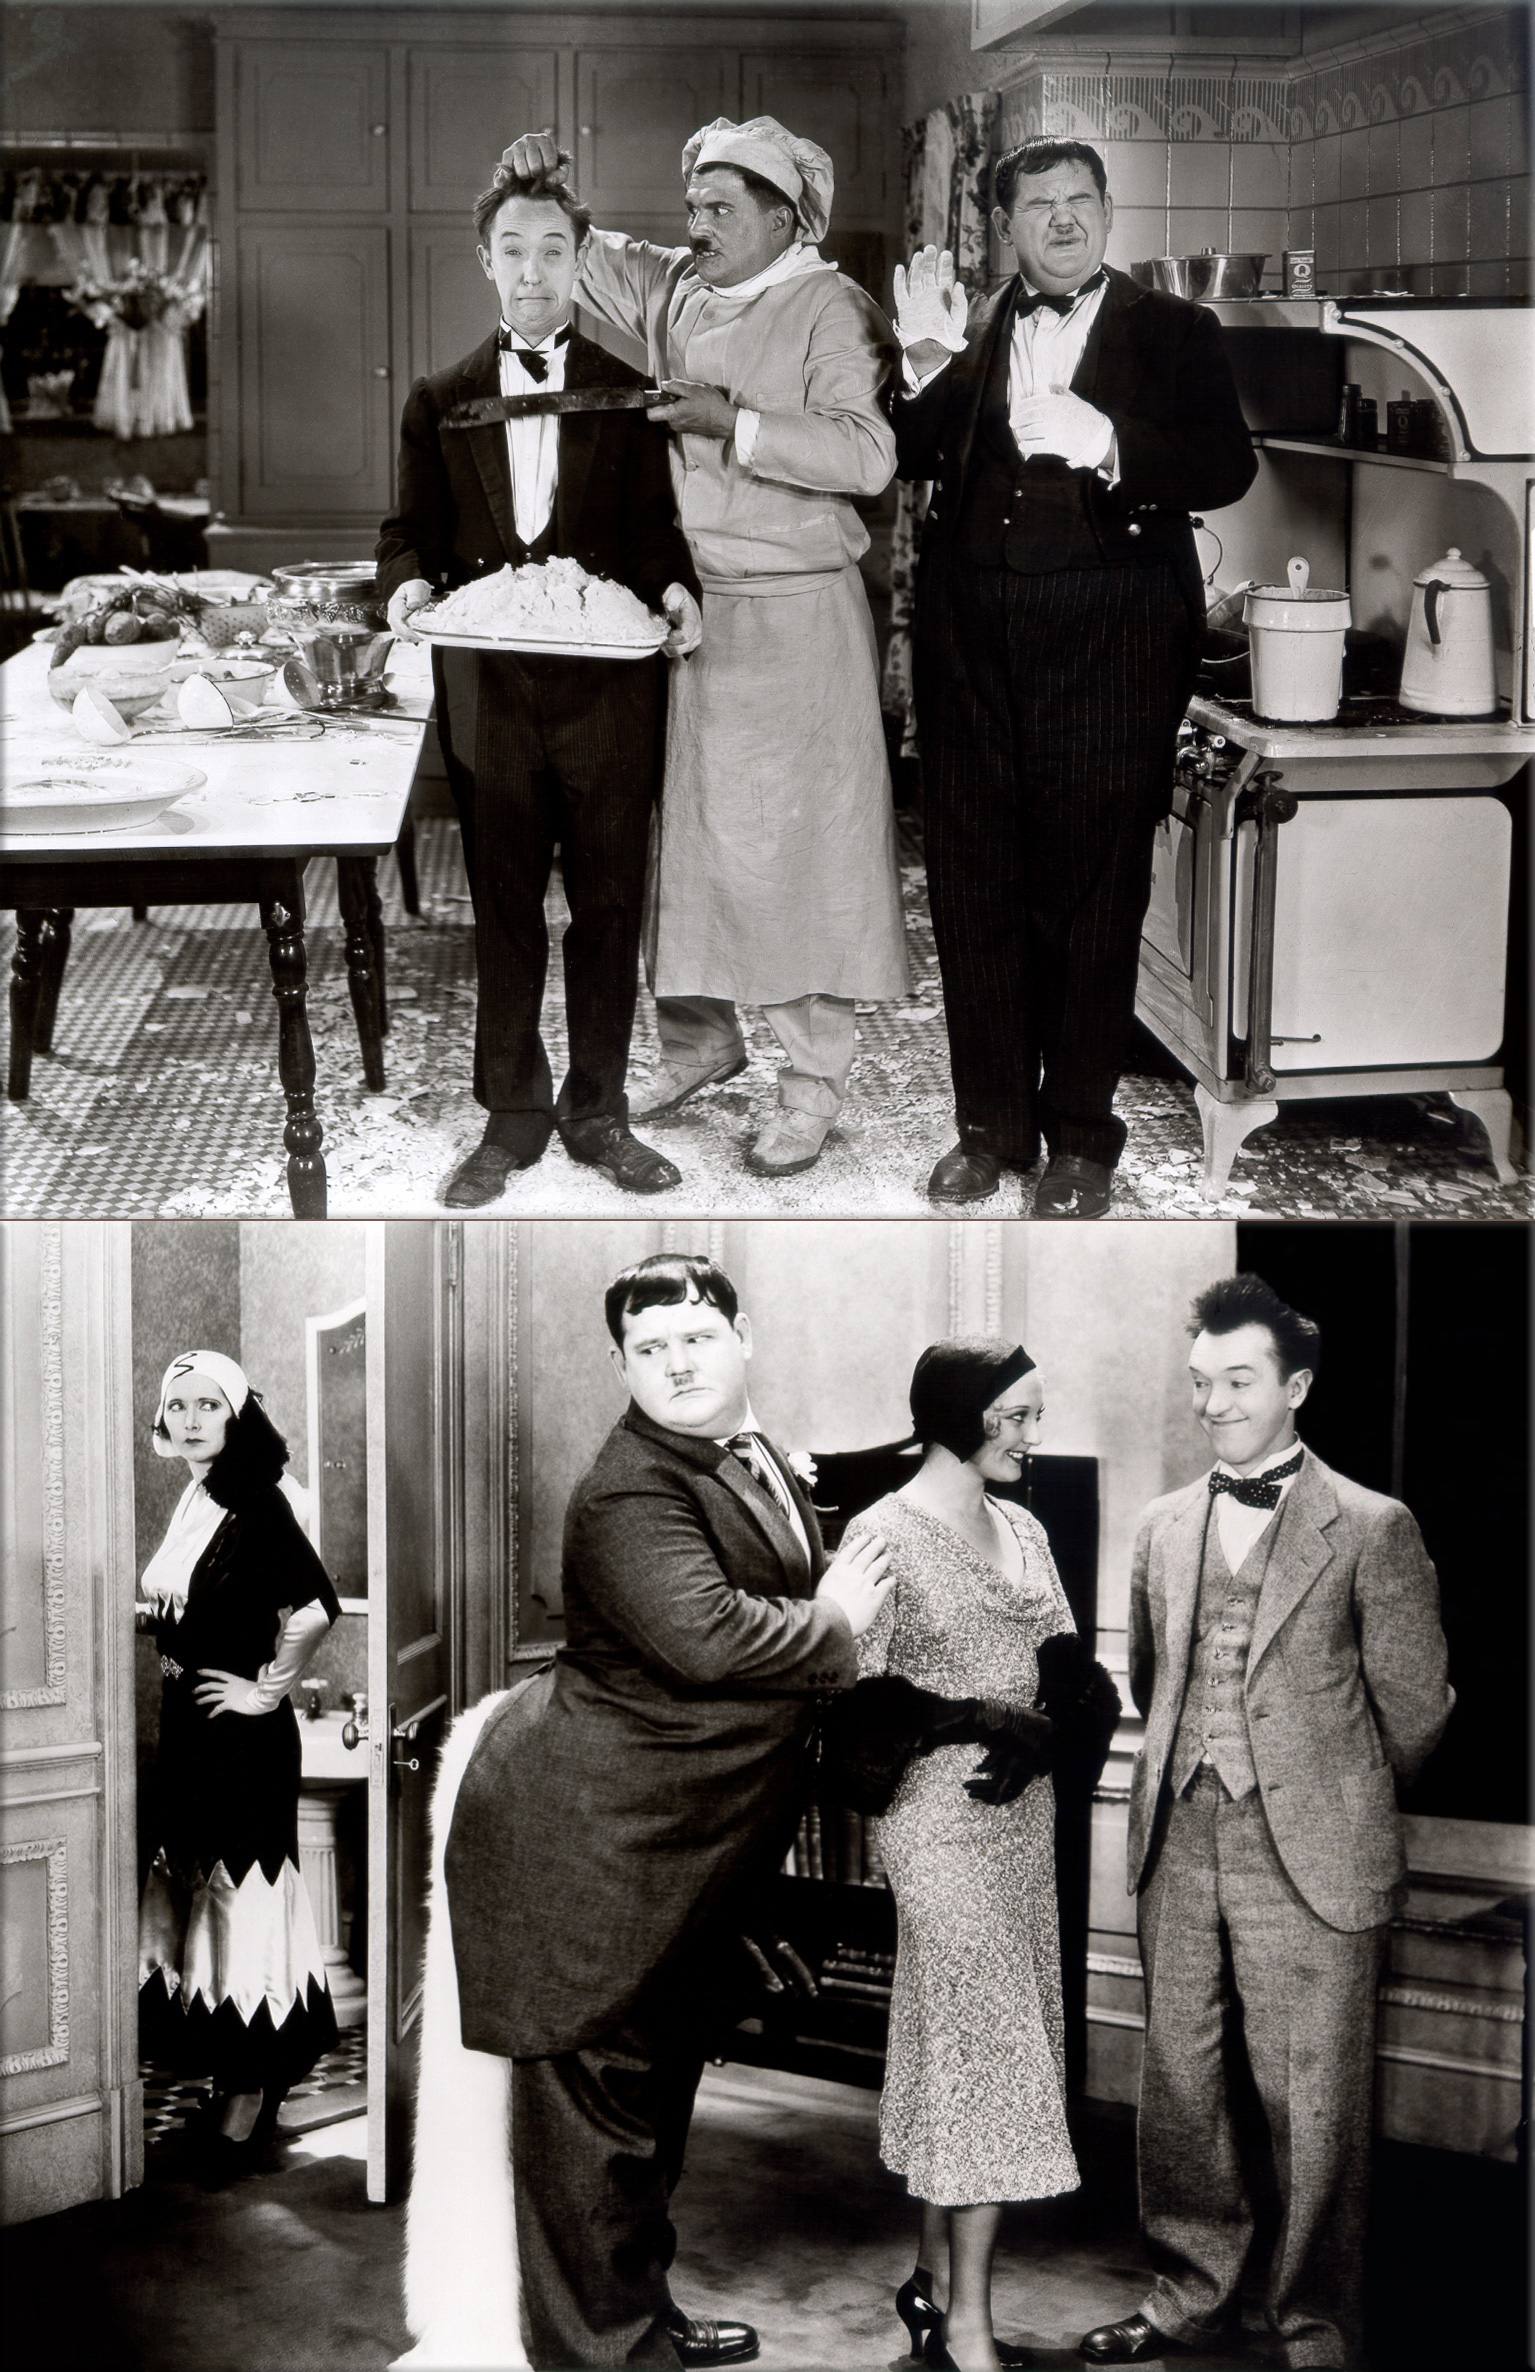 Putting Pants on Philip, the first Laurel and Hardy film, is released - Soup to Nuts / Chickens Come Home